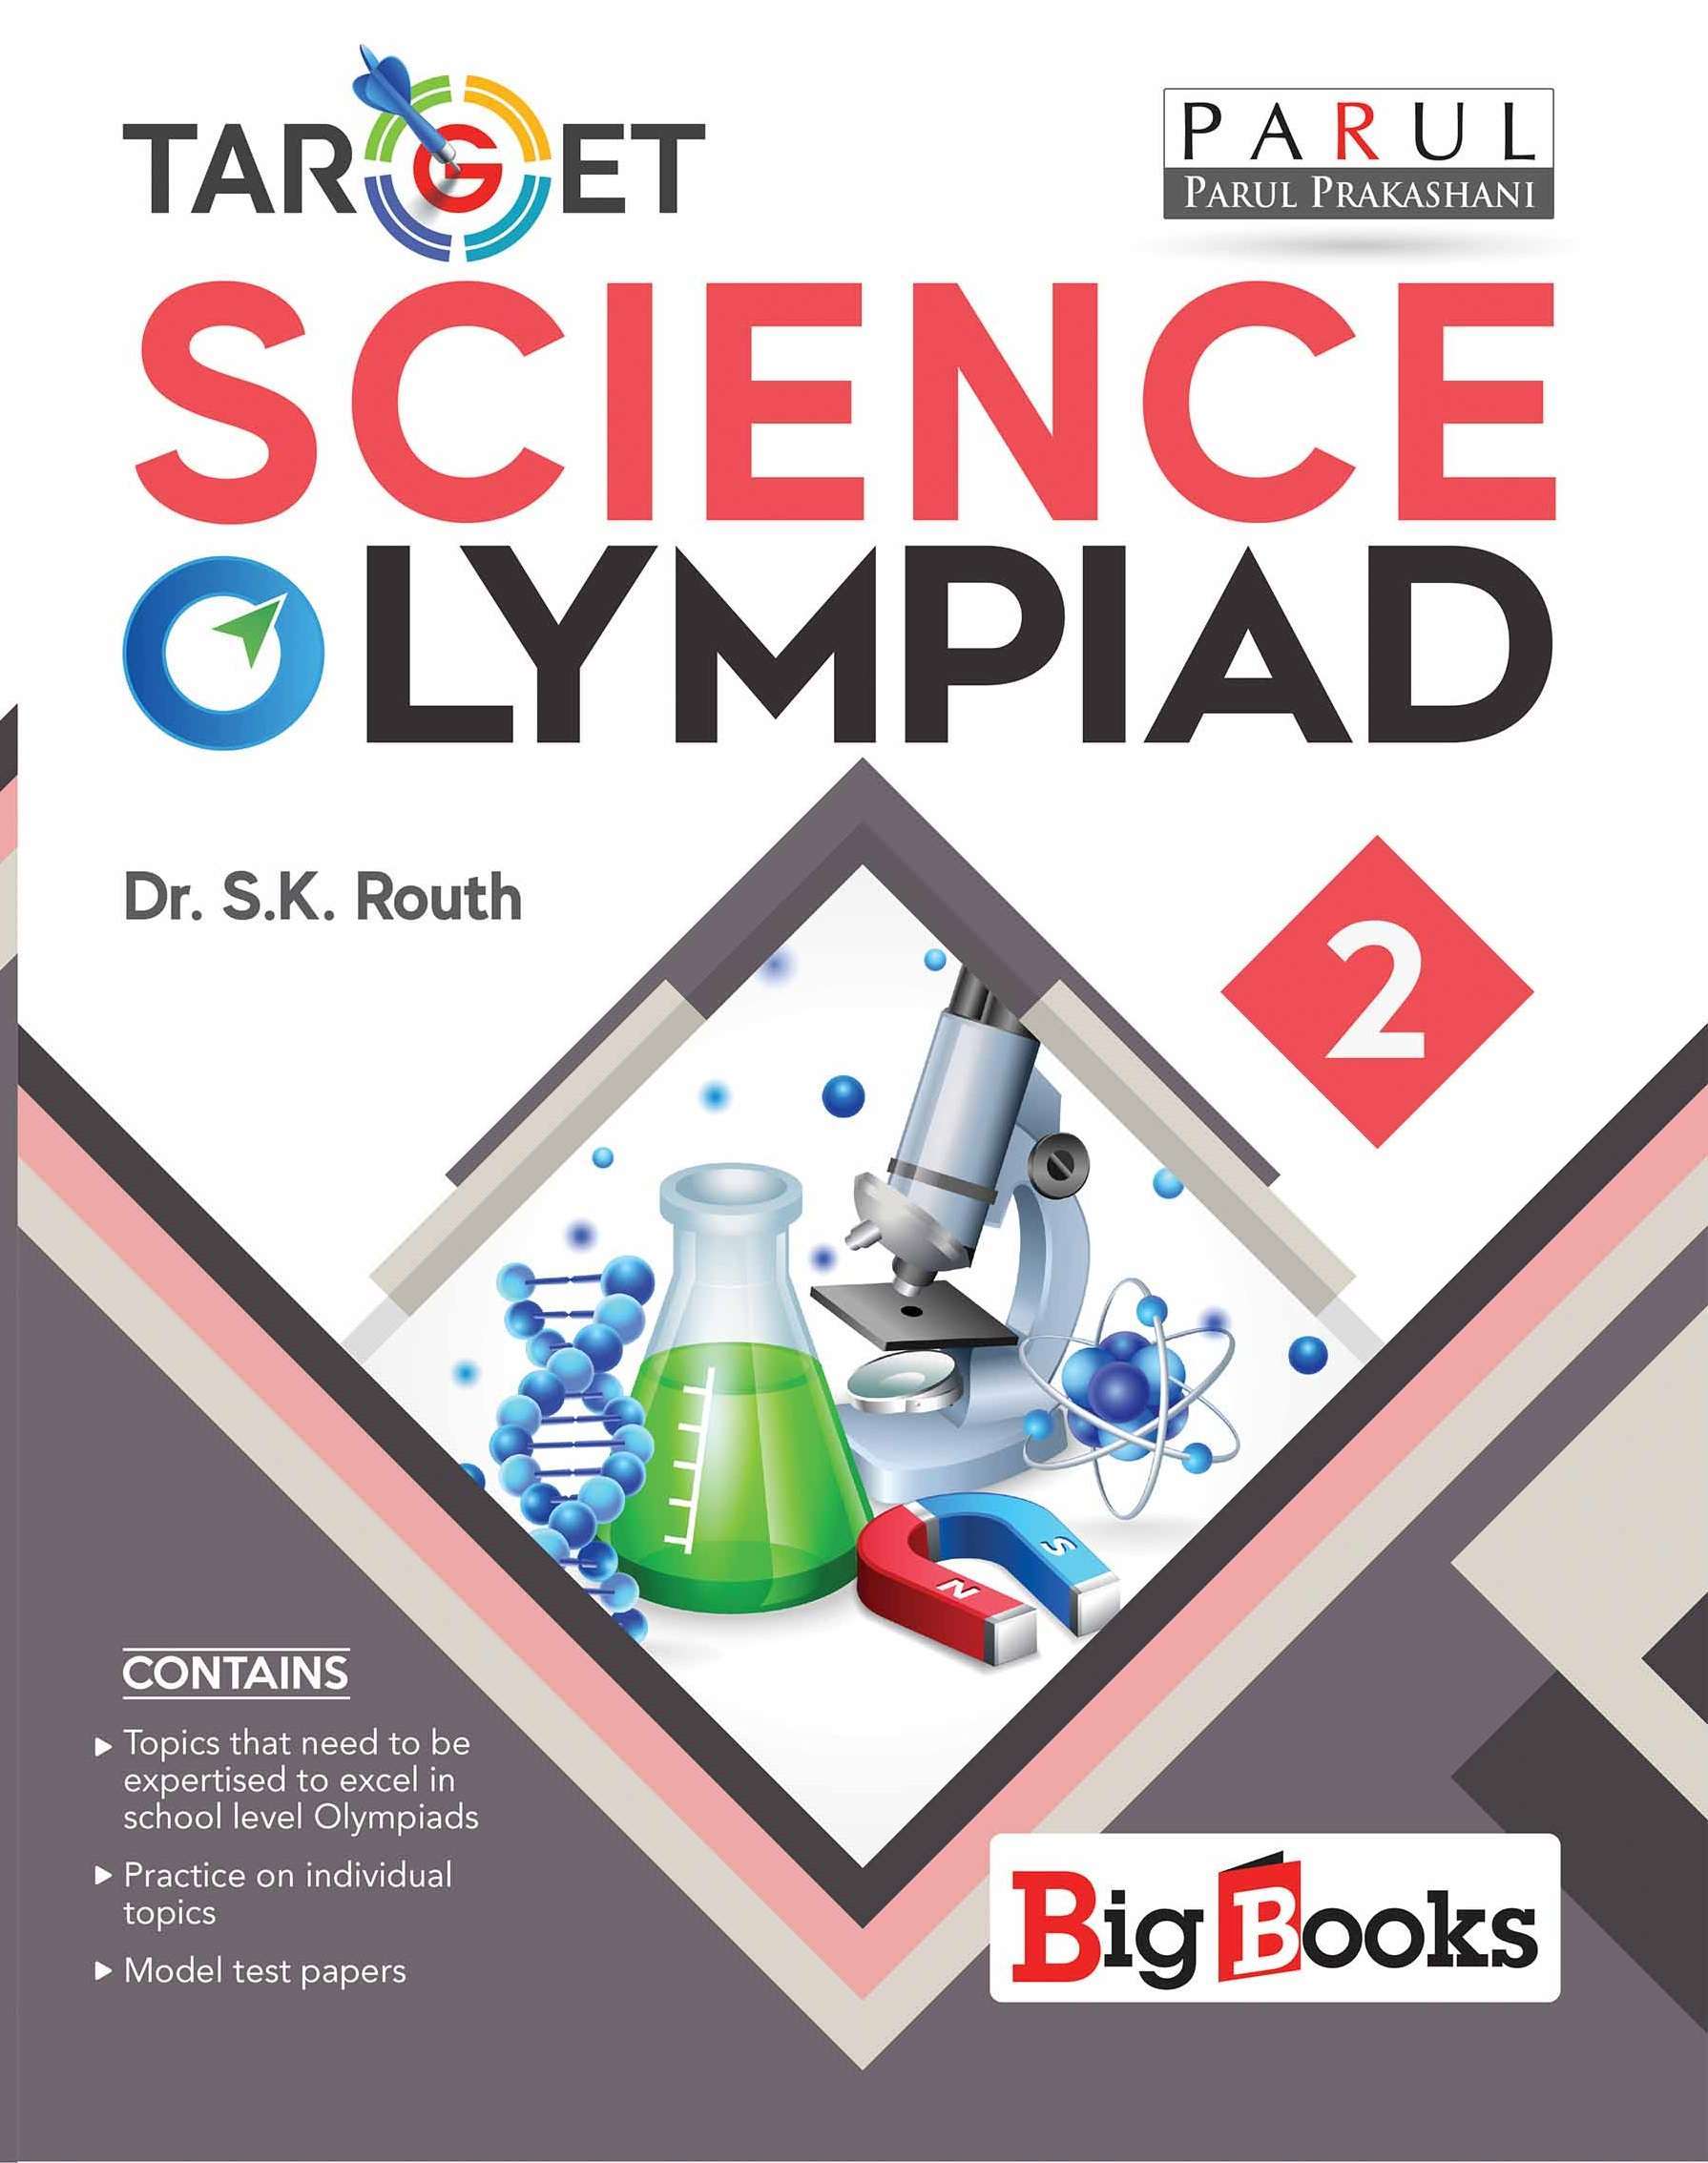 Buy Science Olympiad book for 2